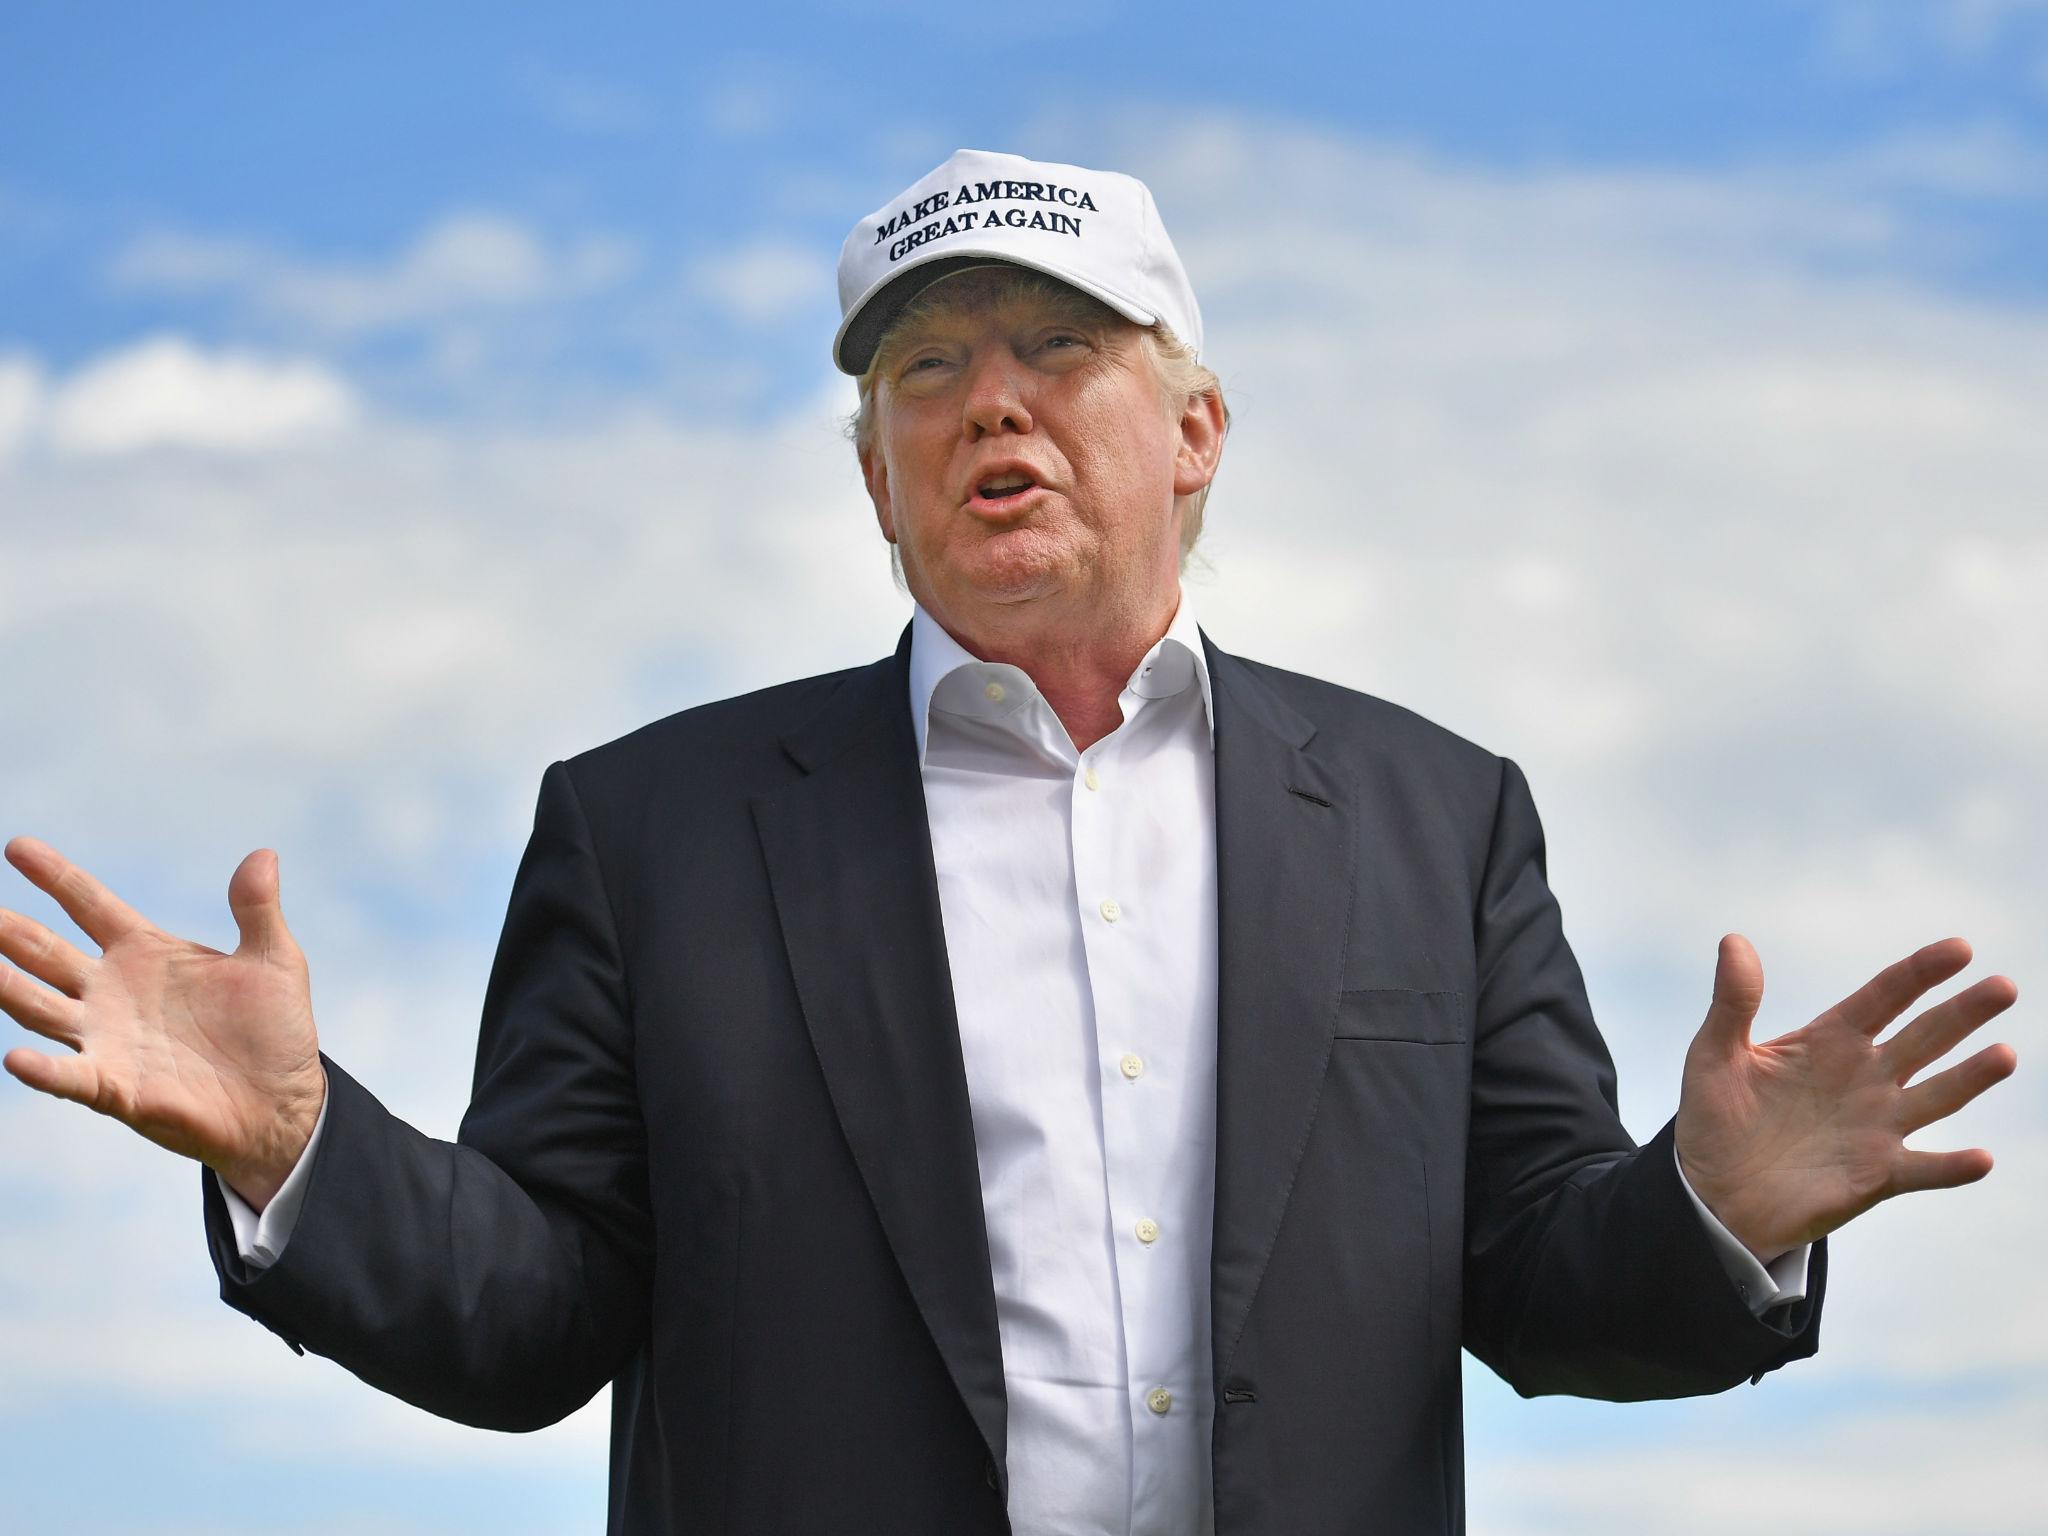 President is expected to visit one of his Scottish golf courses this month